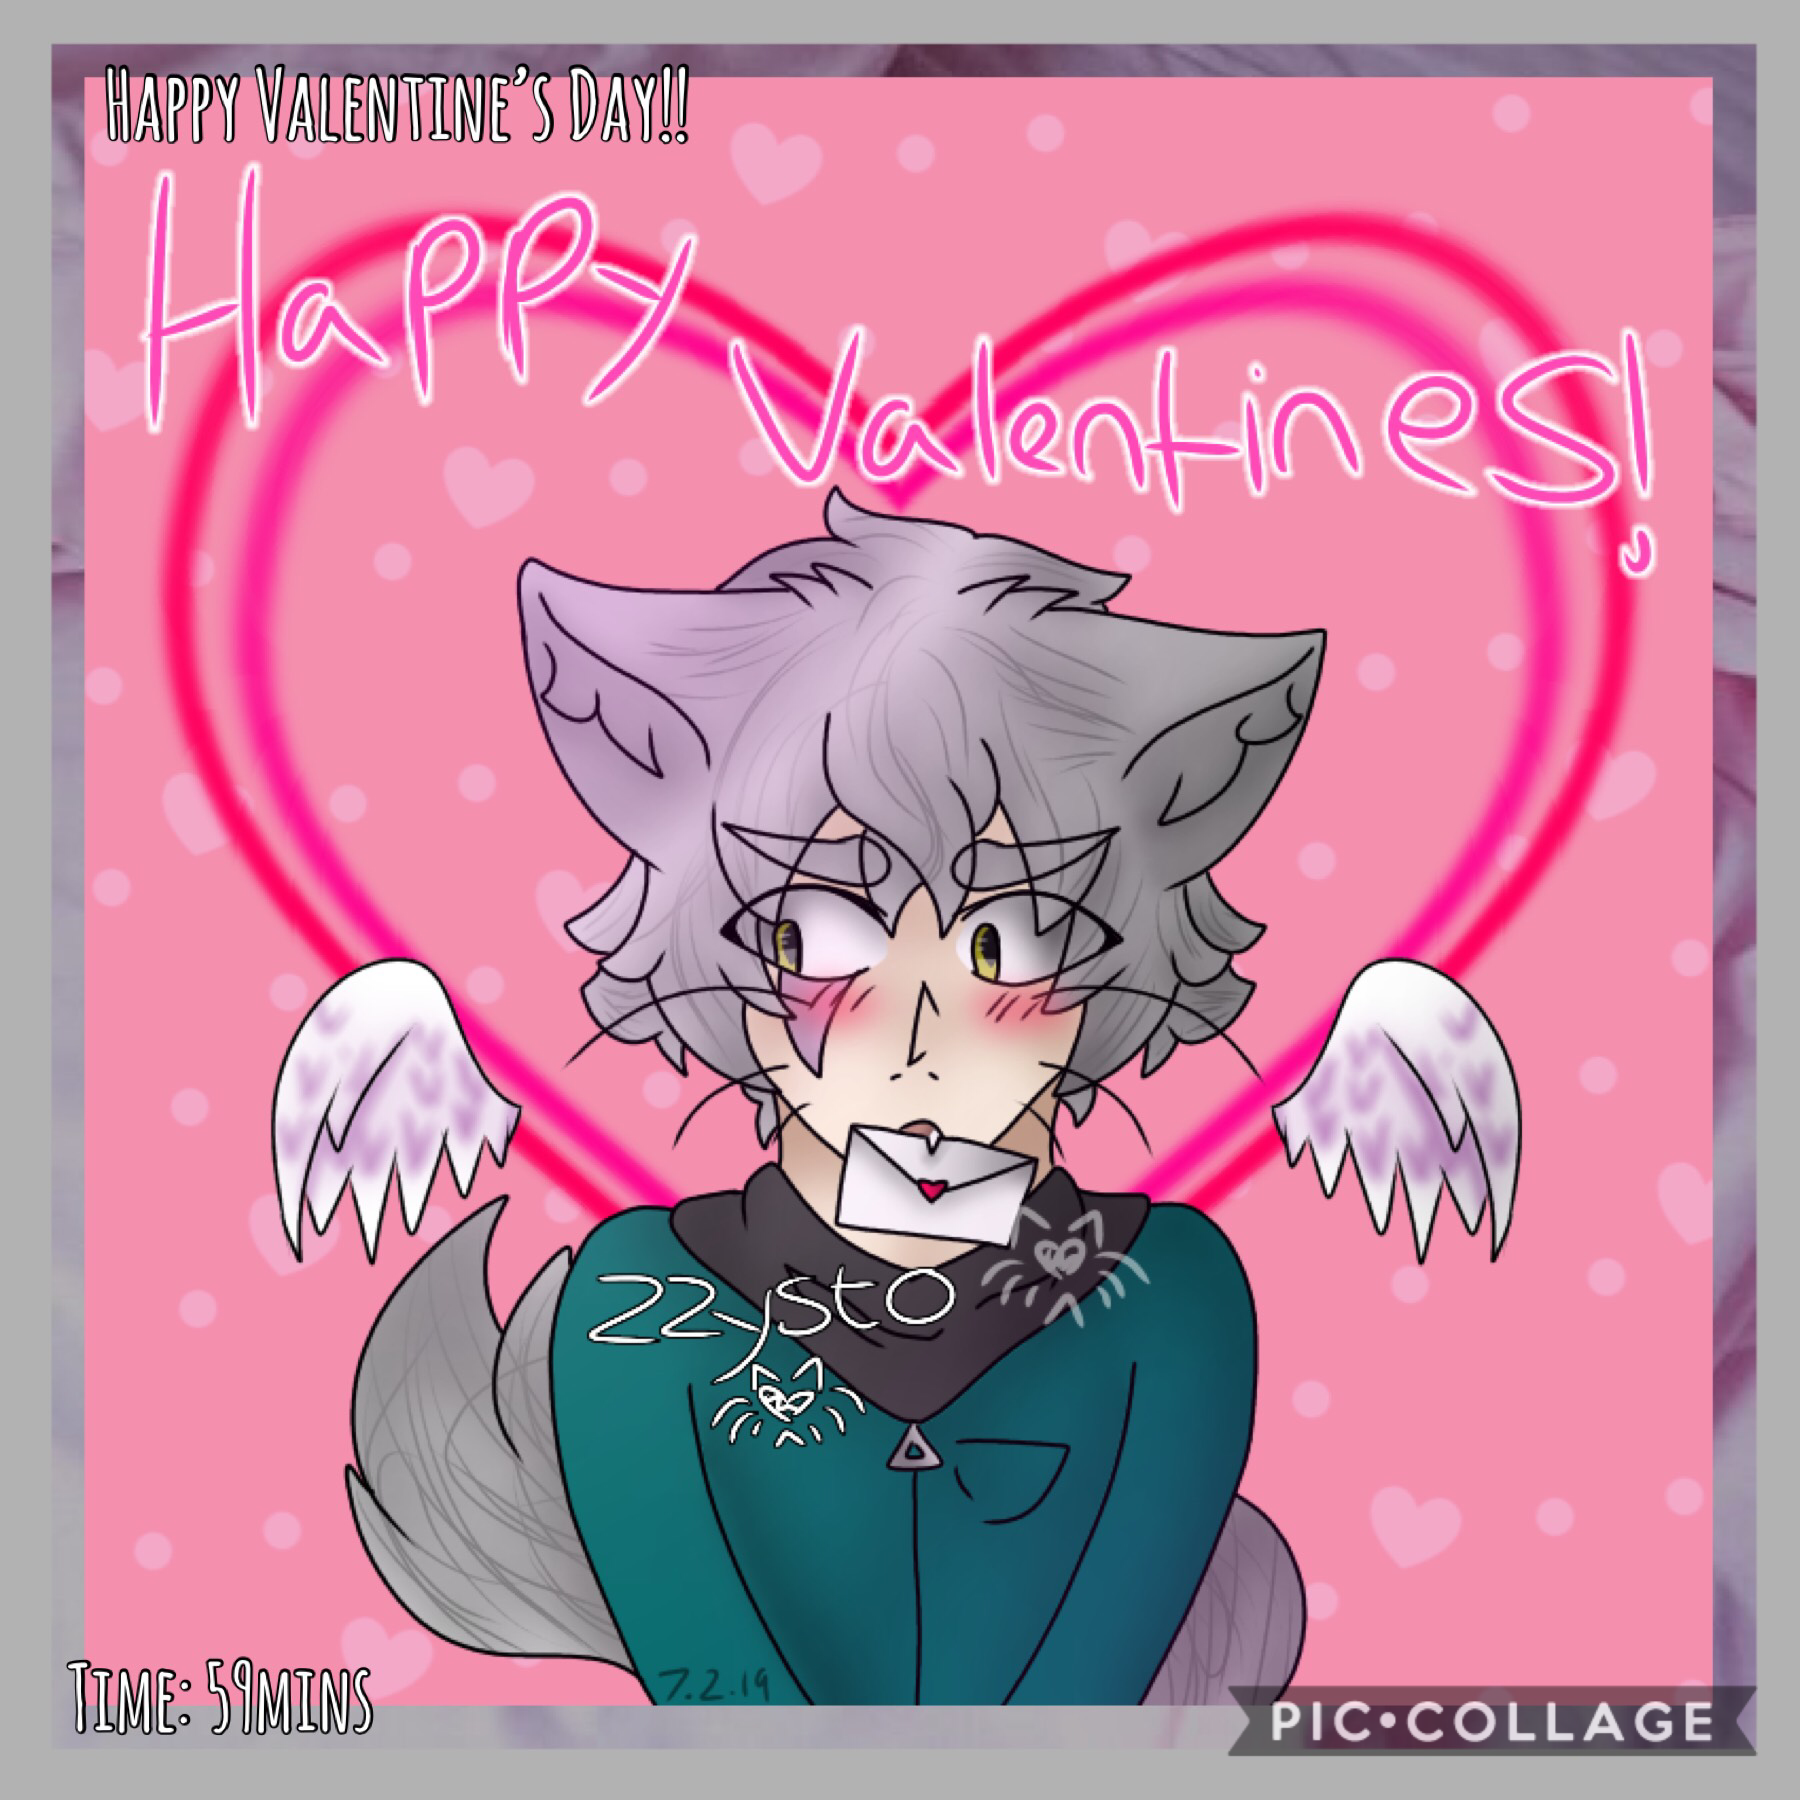 💞Tap💞
(Look in comments)
Happy Valentines Day!
I hope y’all have a good day with the ones you love x3 I’ll be spending it alone but I’m not bothered. I love you all so so much (as friends ^^”) and have no idea where I’ll be without you all!~